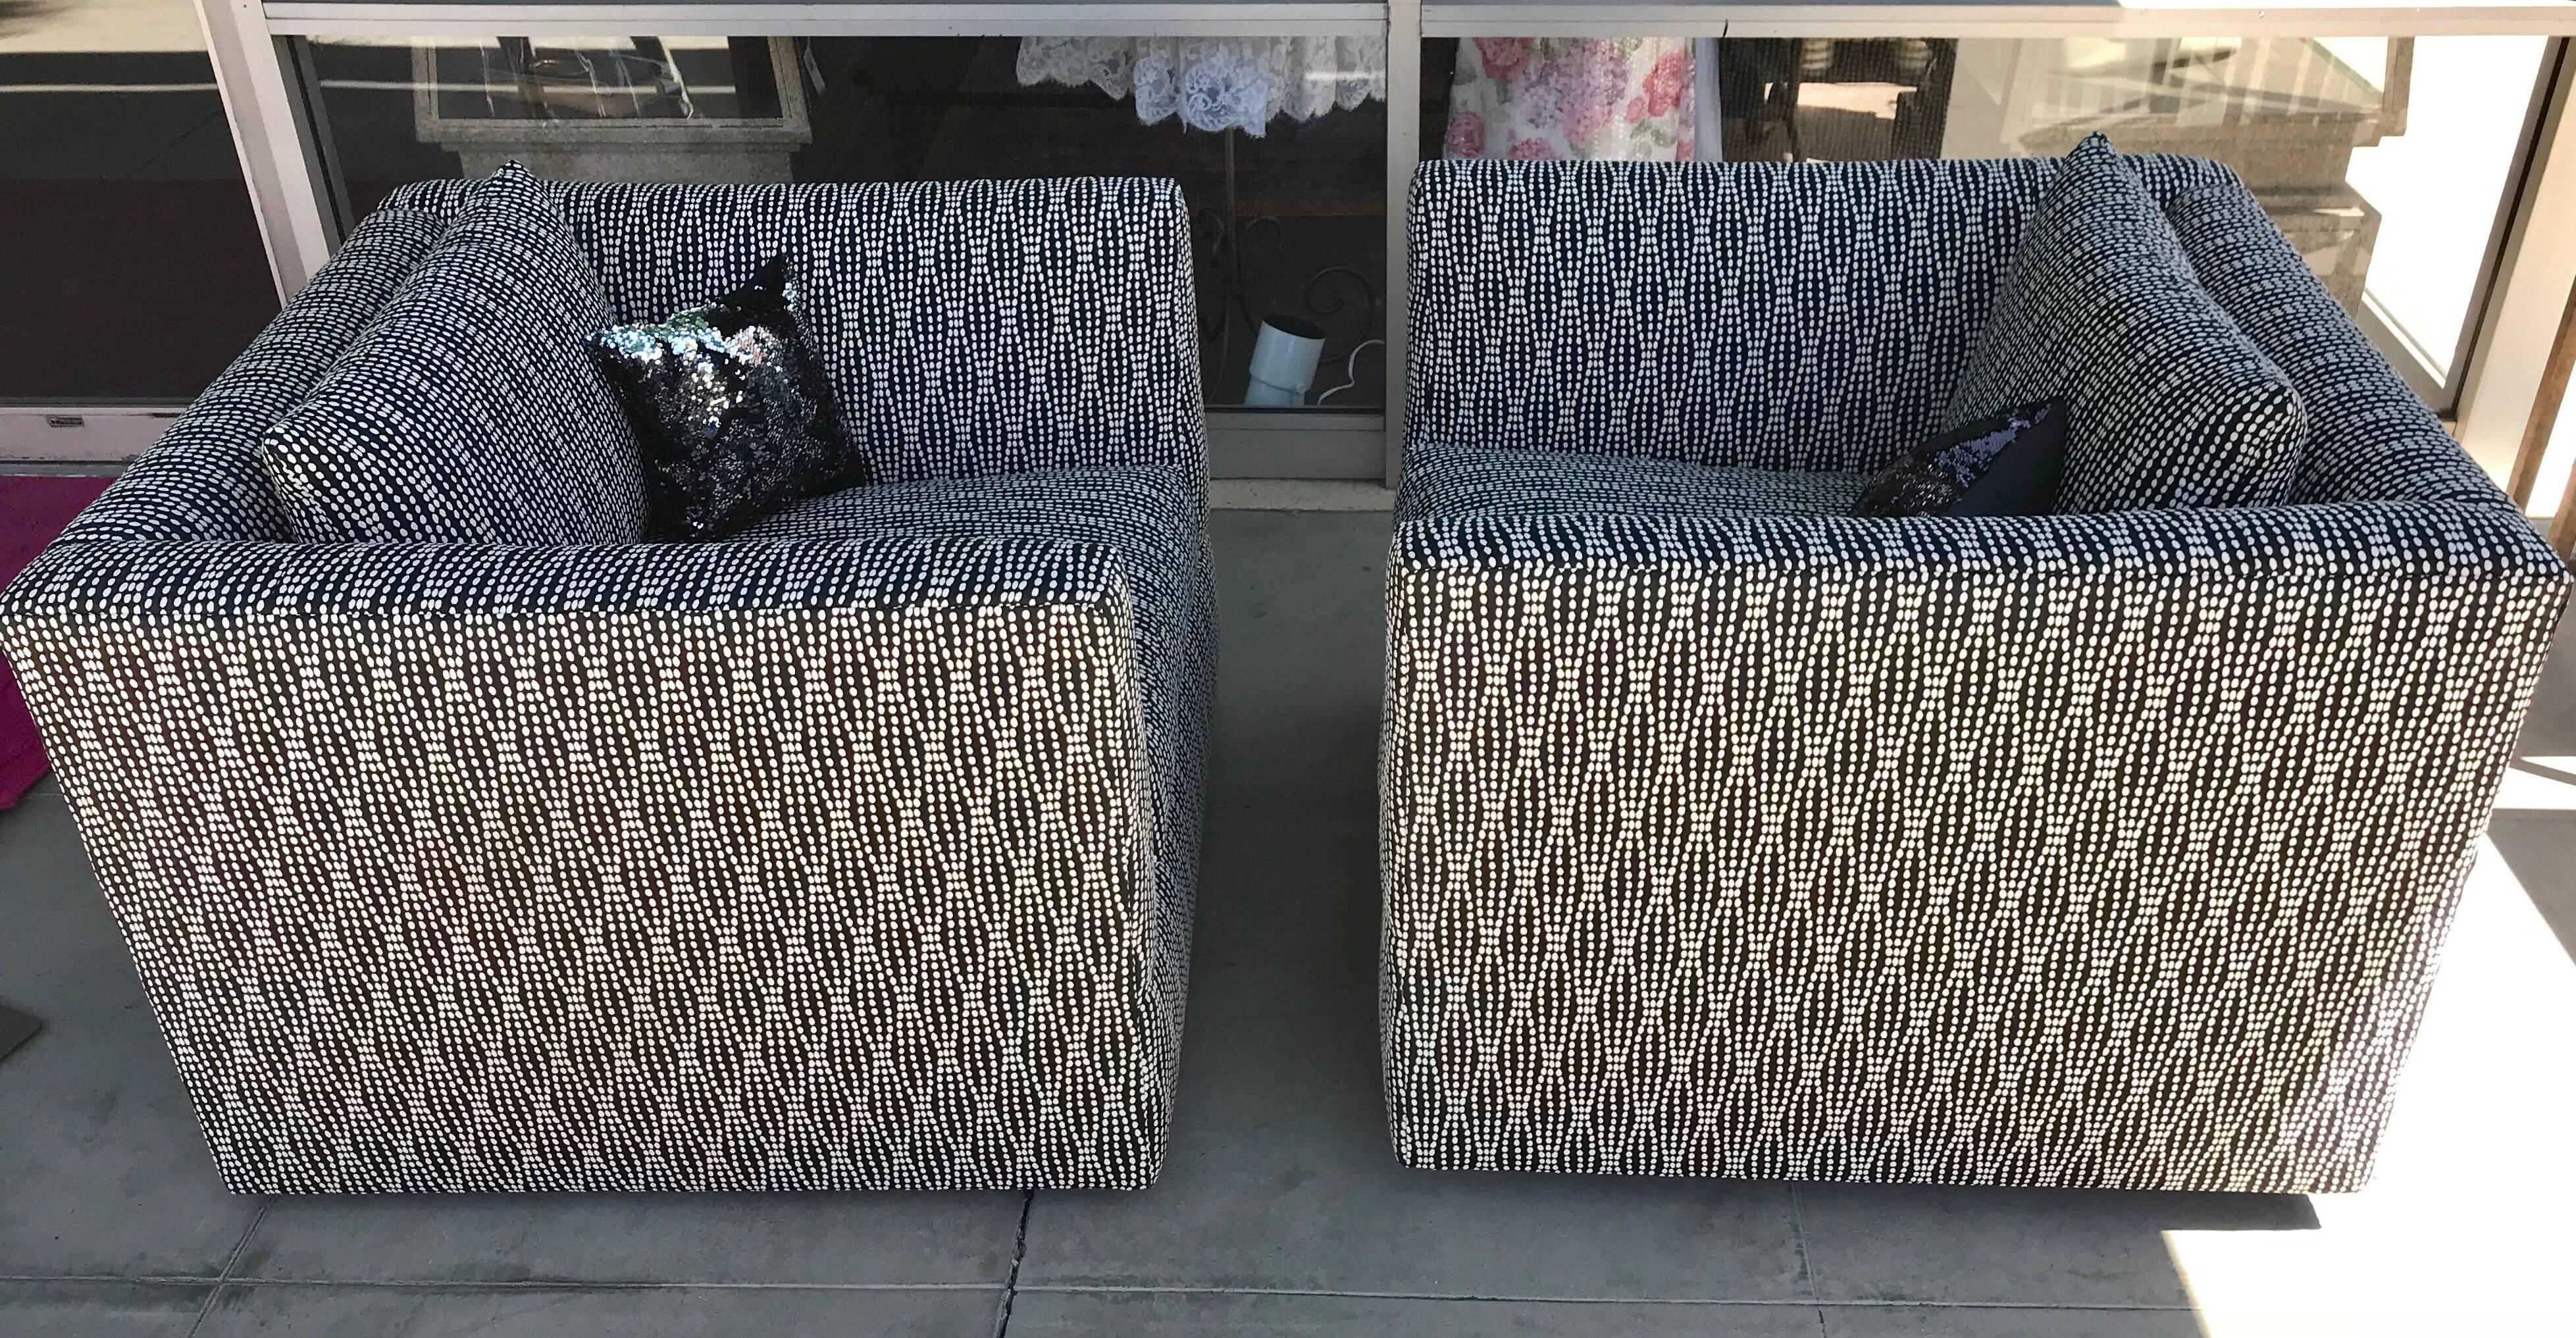 Pair of Vintage Modern Swivel Club Chairs in New Black and White Jacquard Fabric 3